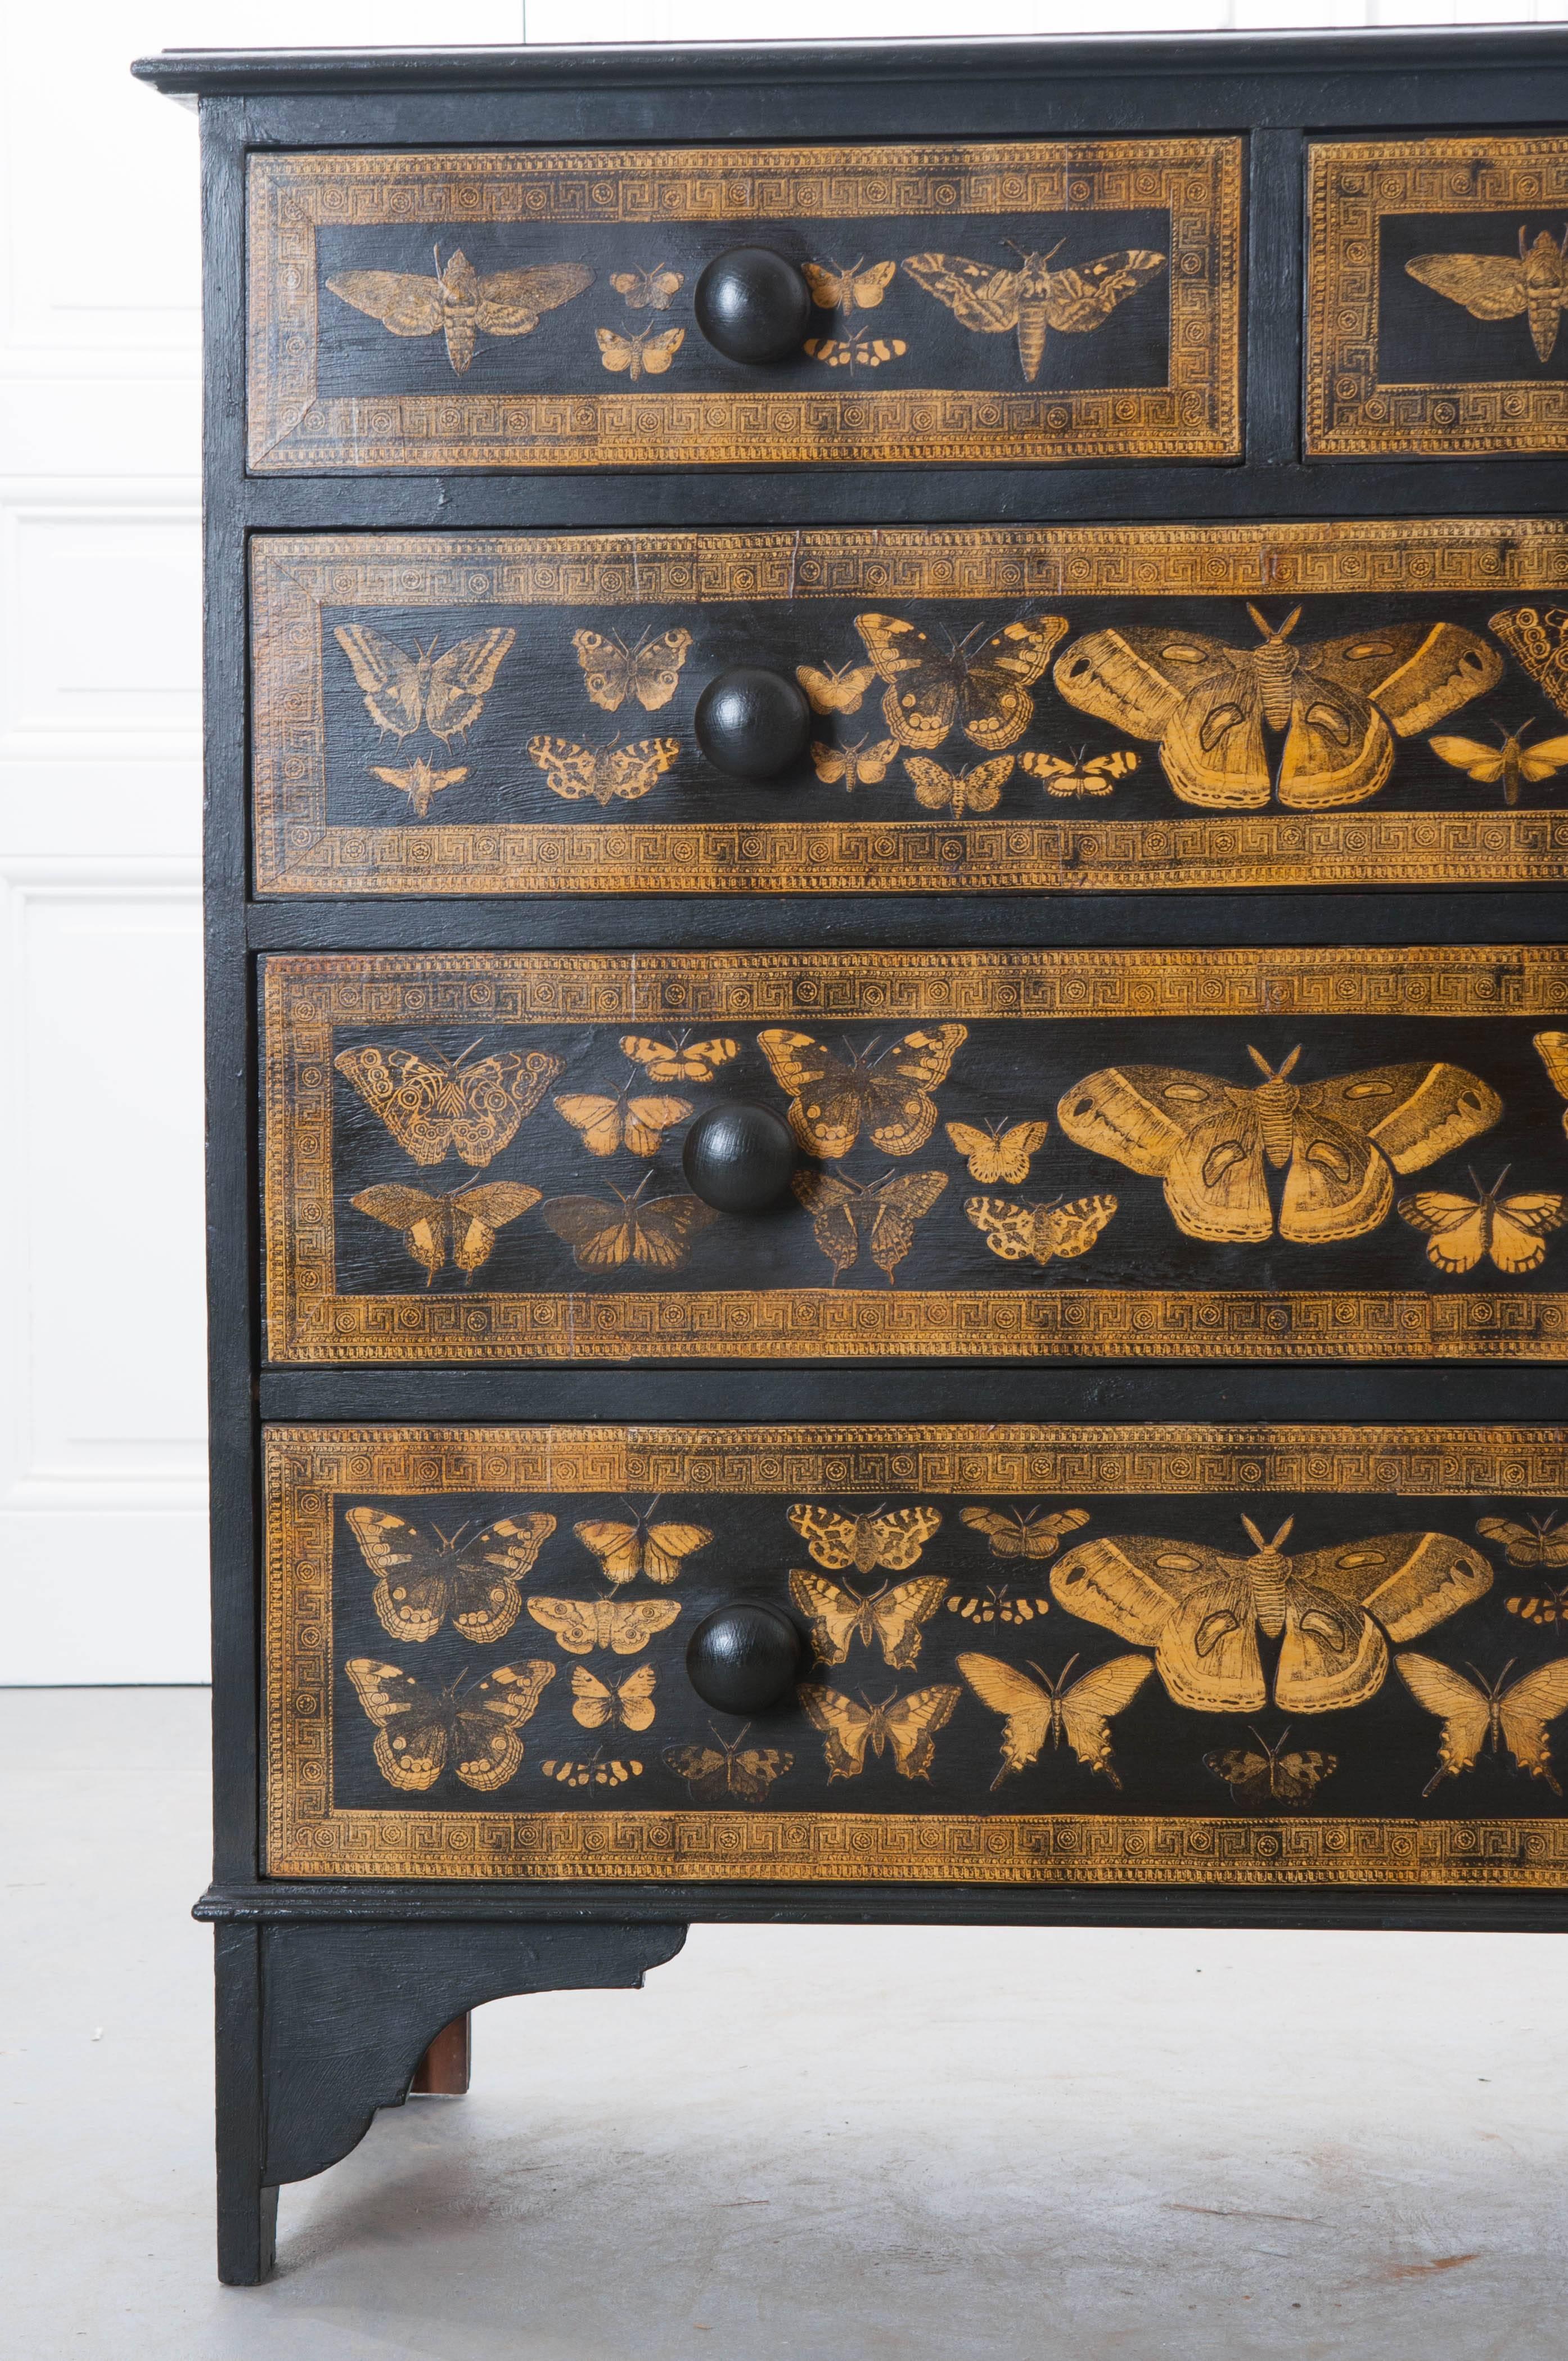 An incredible five drawer Victorian painted chest of drawers from 19th century, England, that has more recently had beautiful gold moths decoupaged onto the piece. The chest has two smaller top drawers with three larger drawers beneath that are